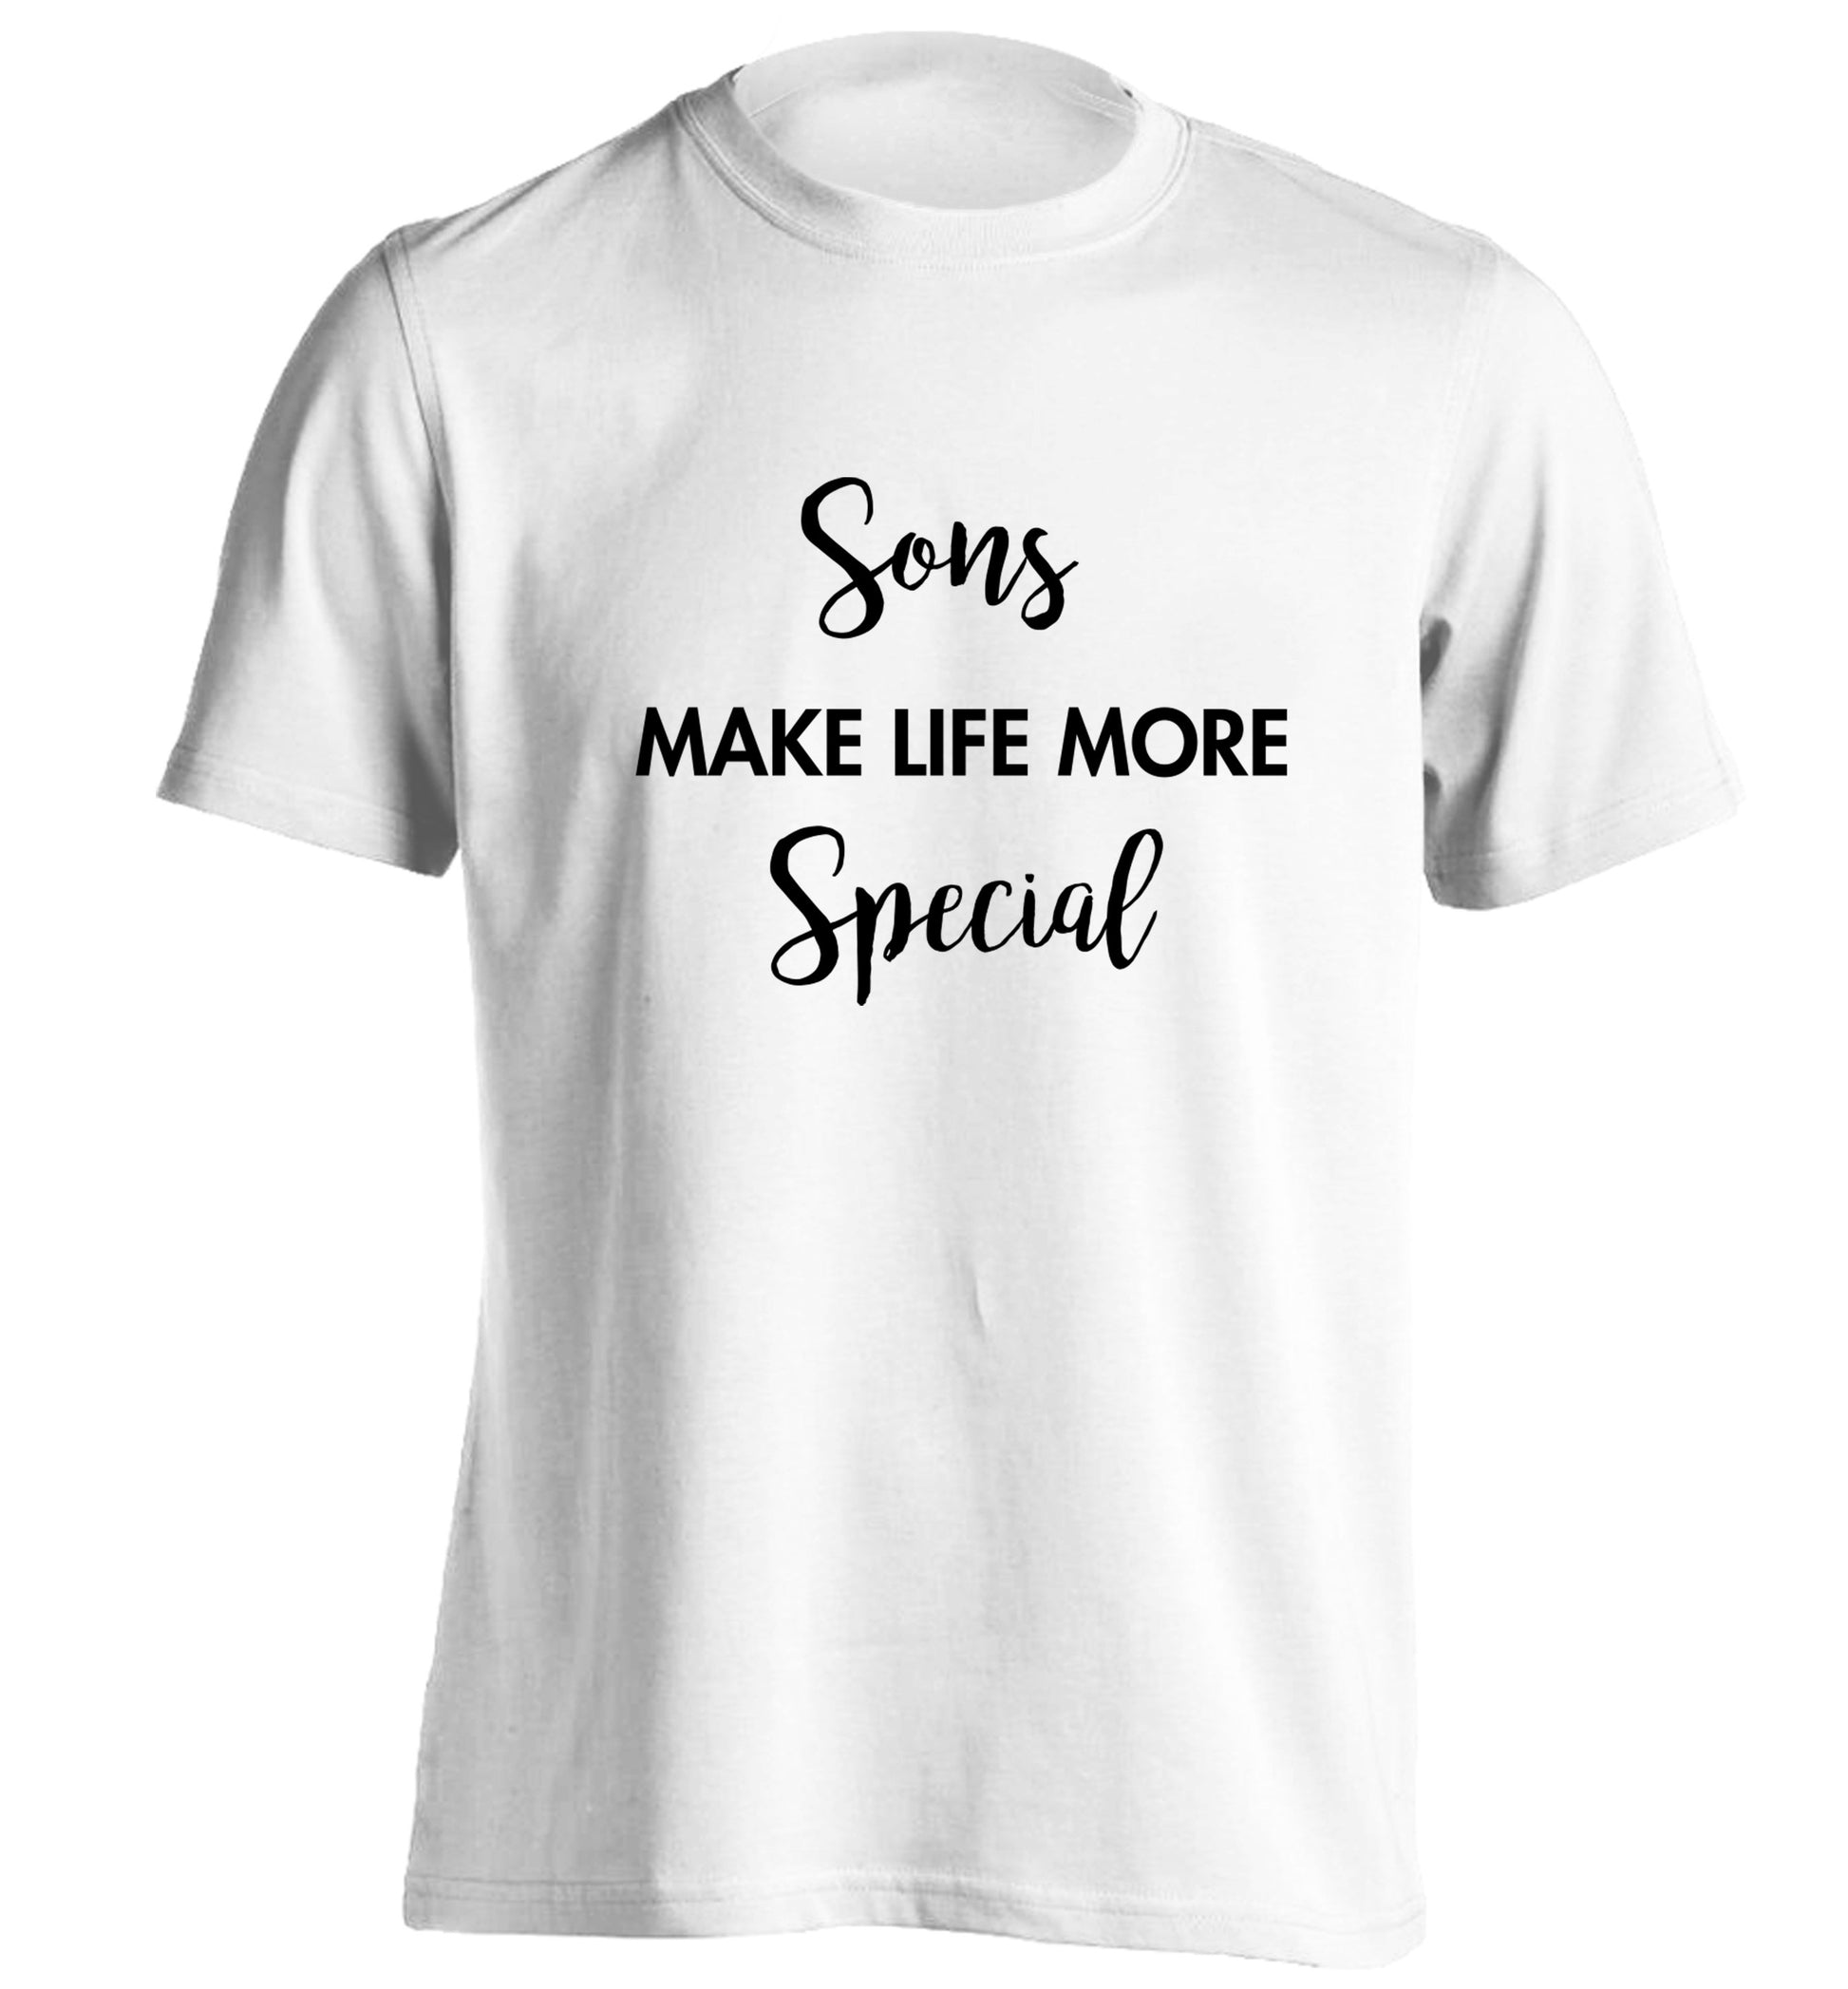 Daughters make life more special adults unisex white Tshirt 2XL